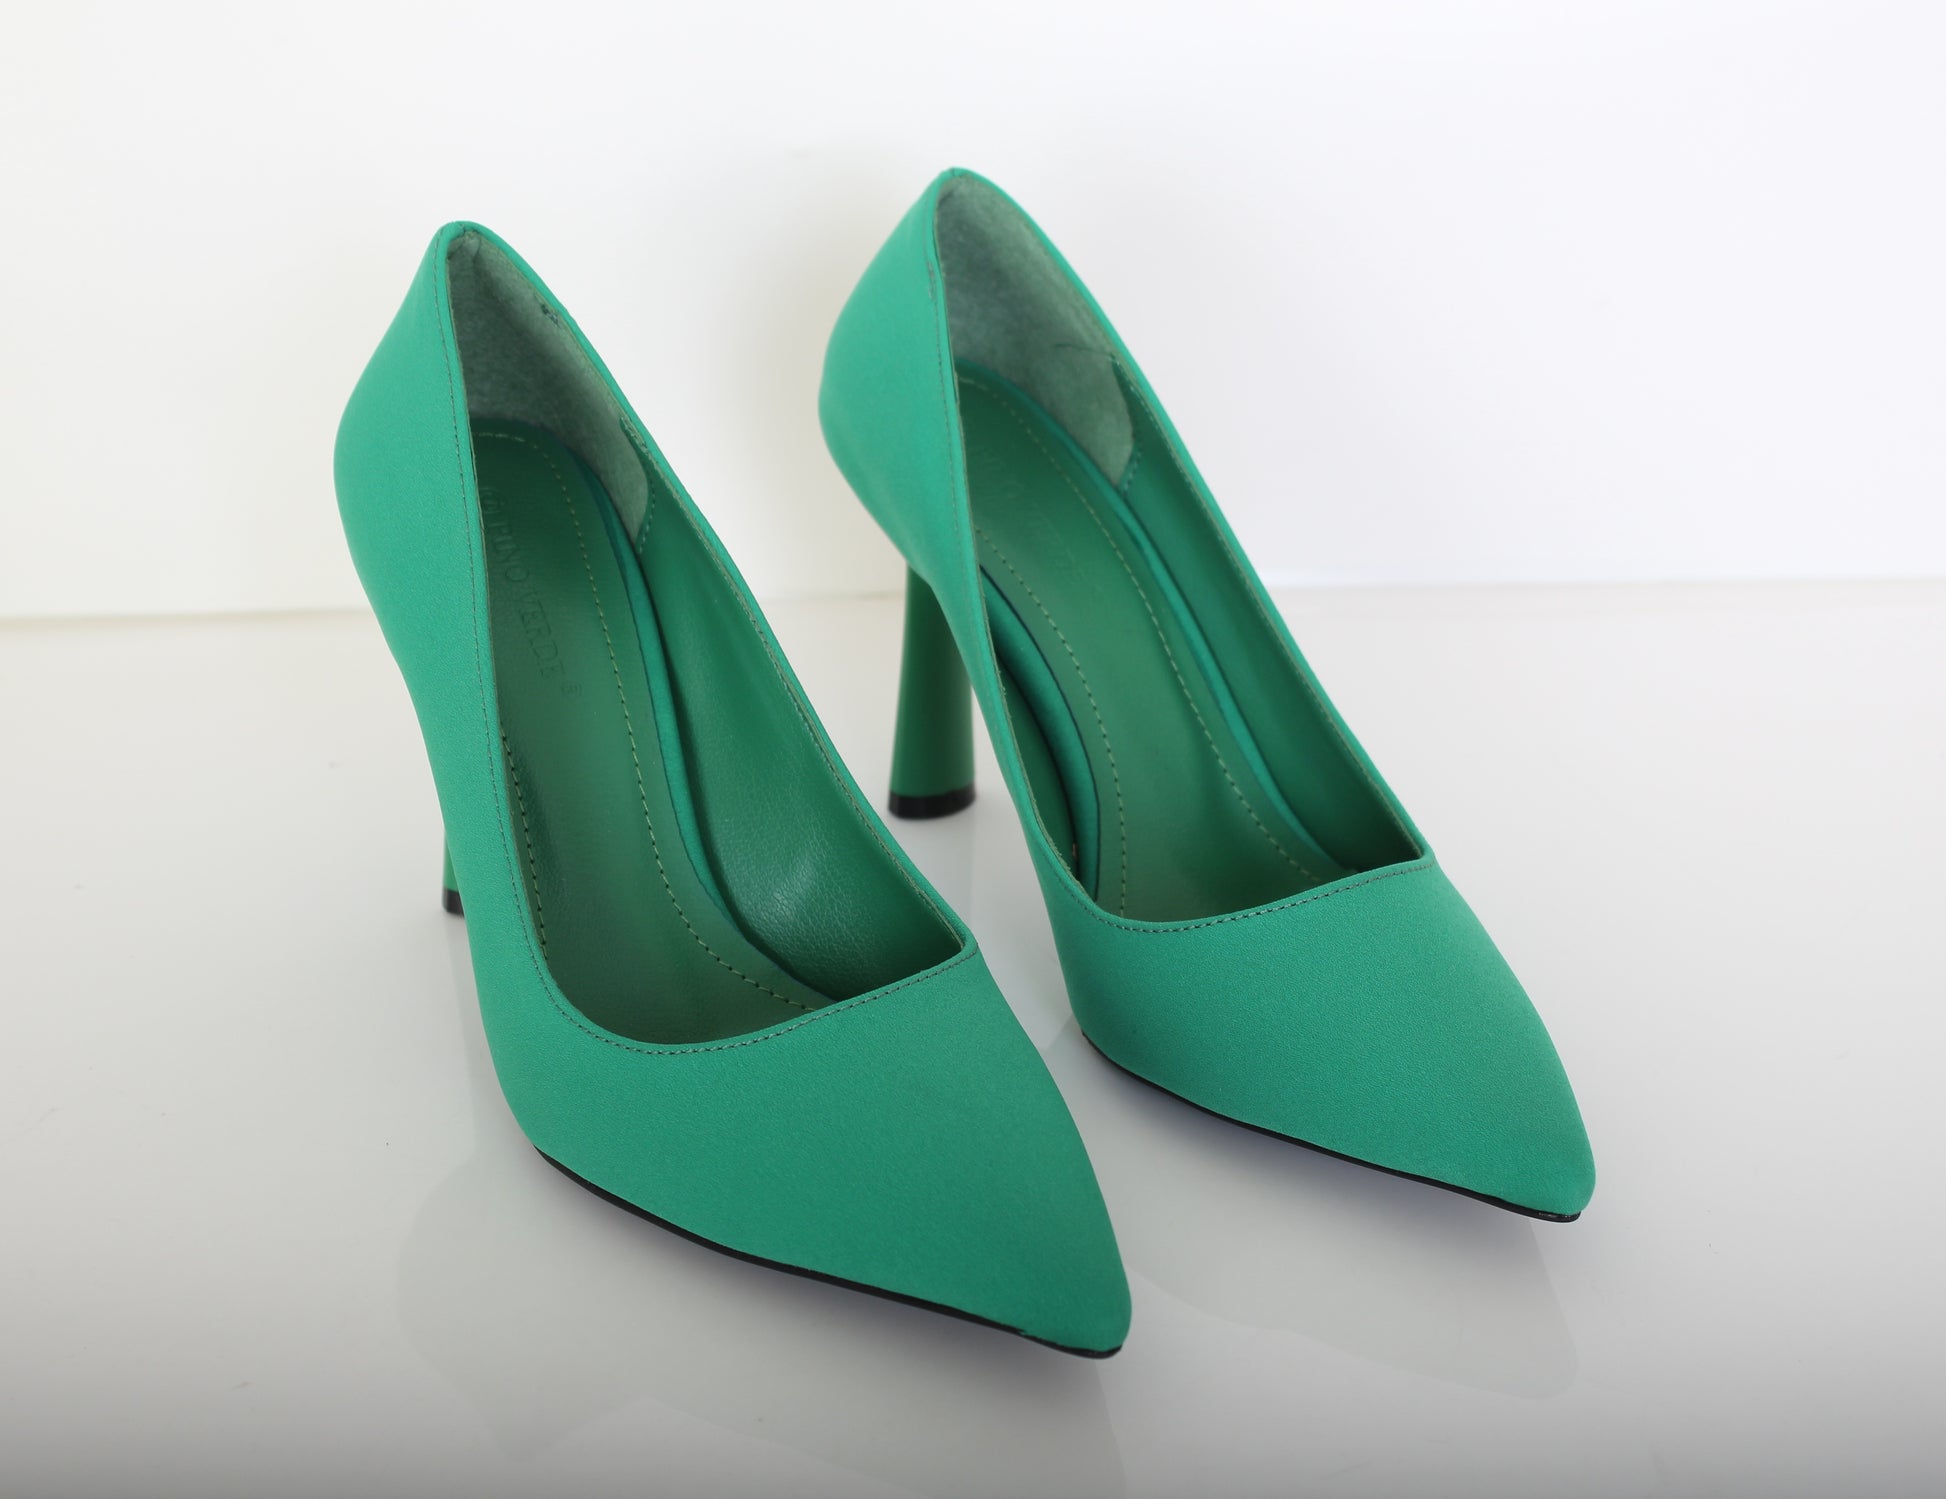 Green colored Heel pump shoes for women